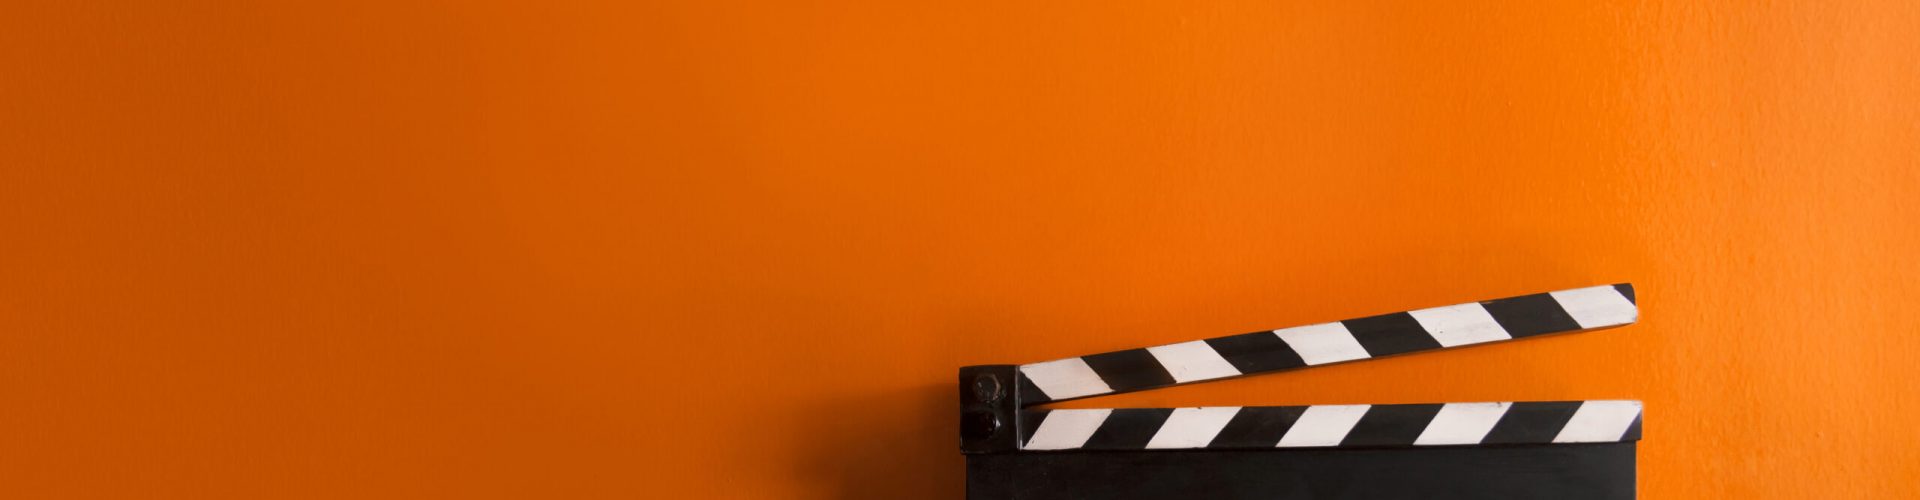 Important tools for creating movies And digital marketing